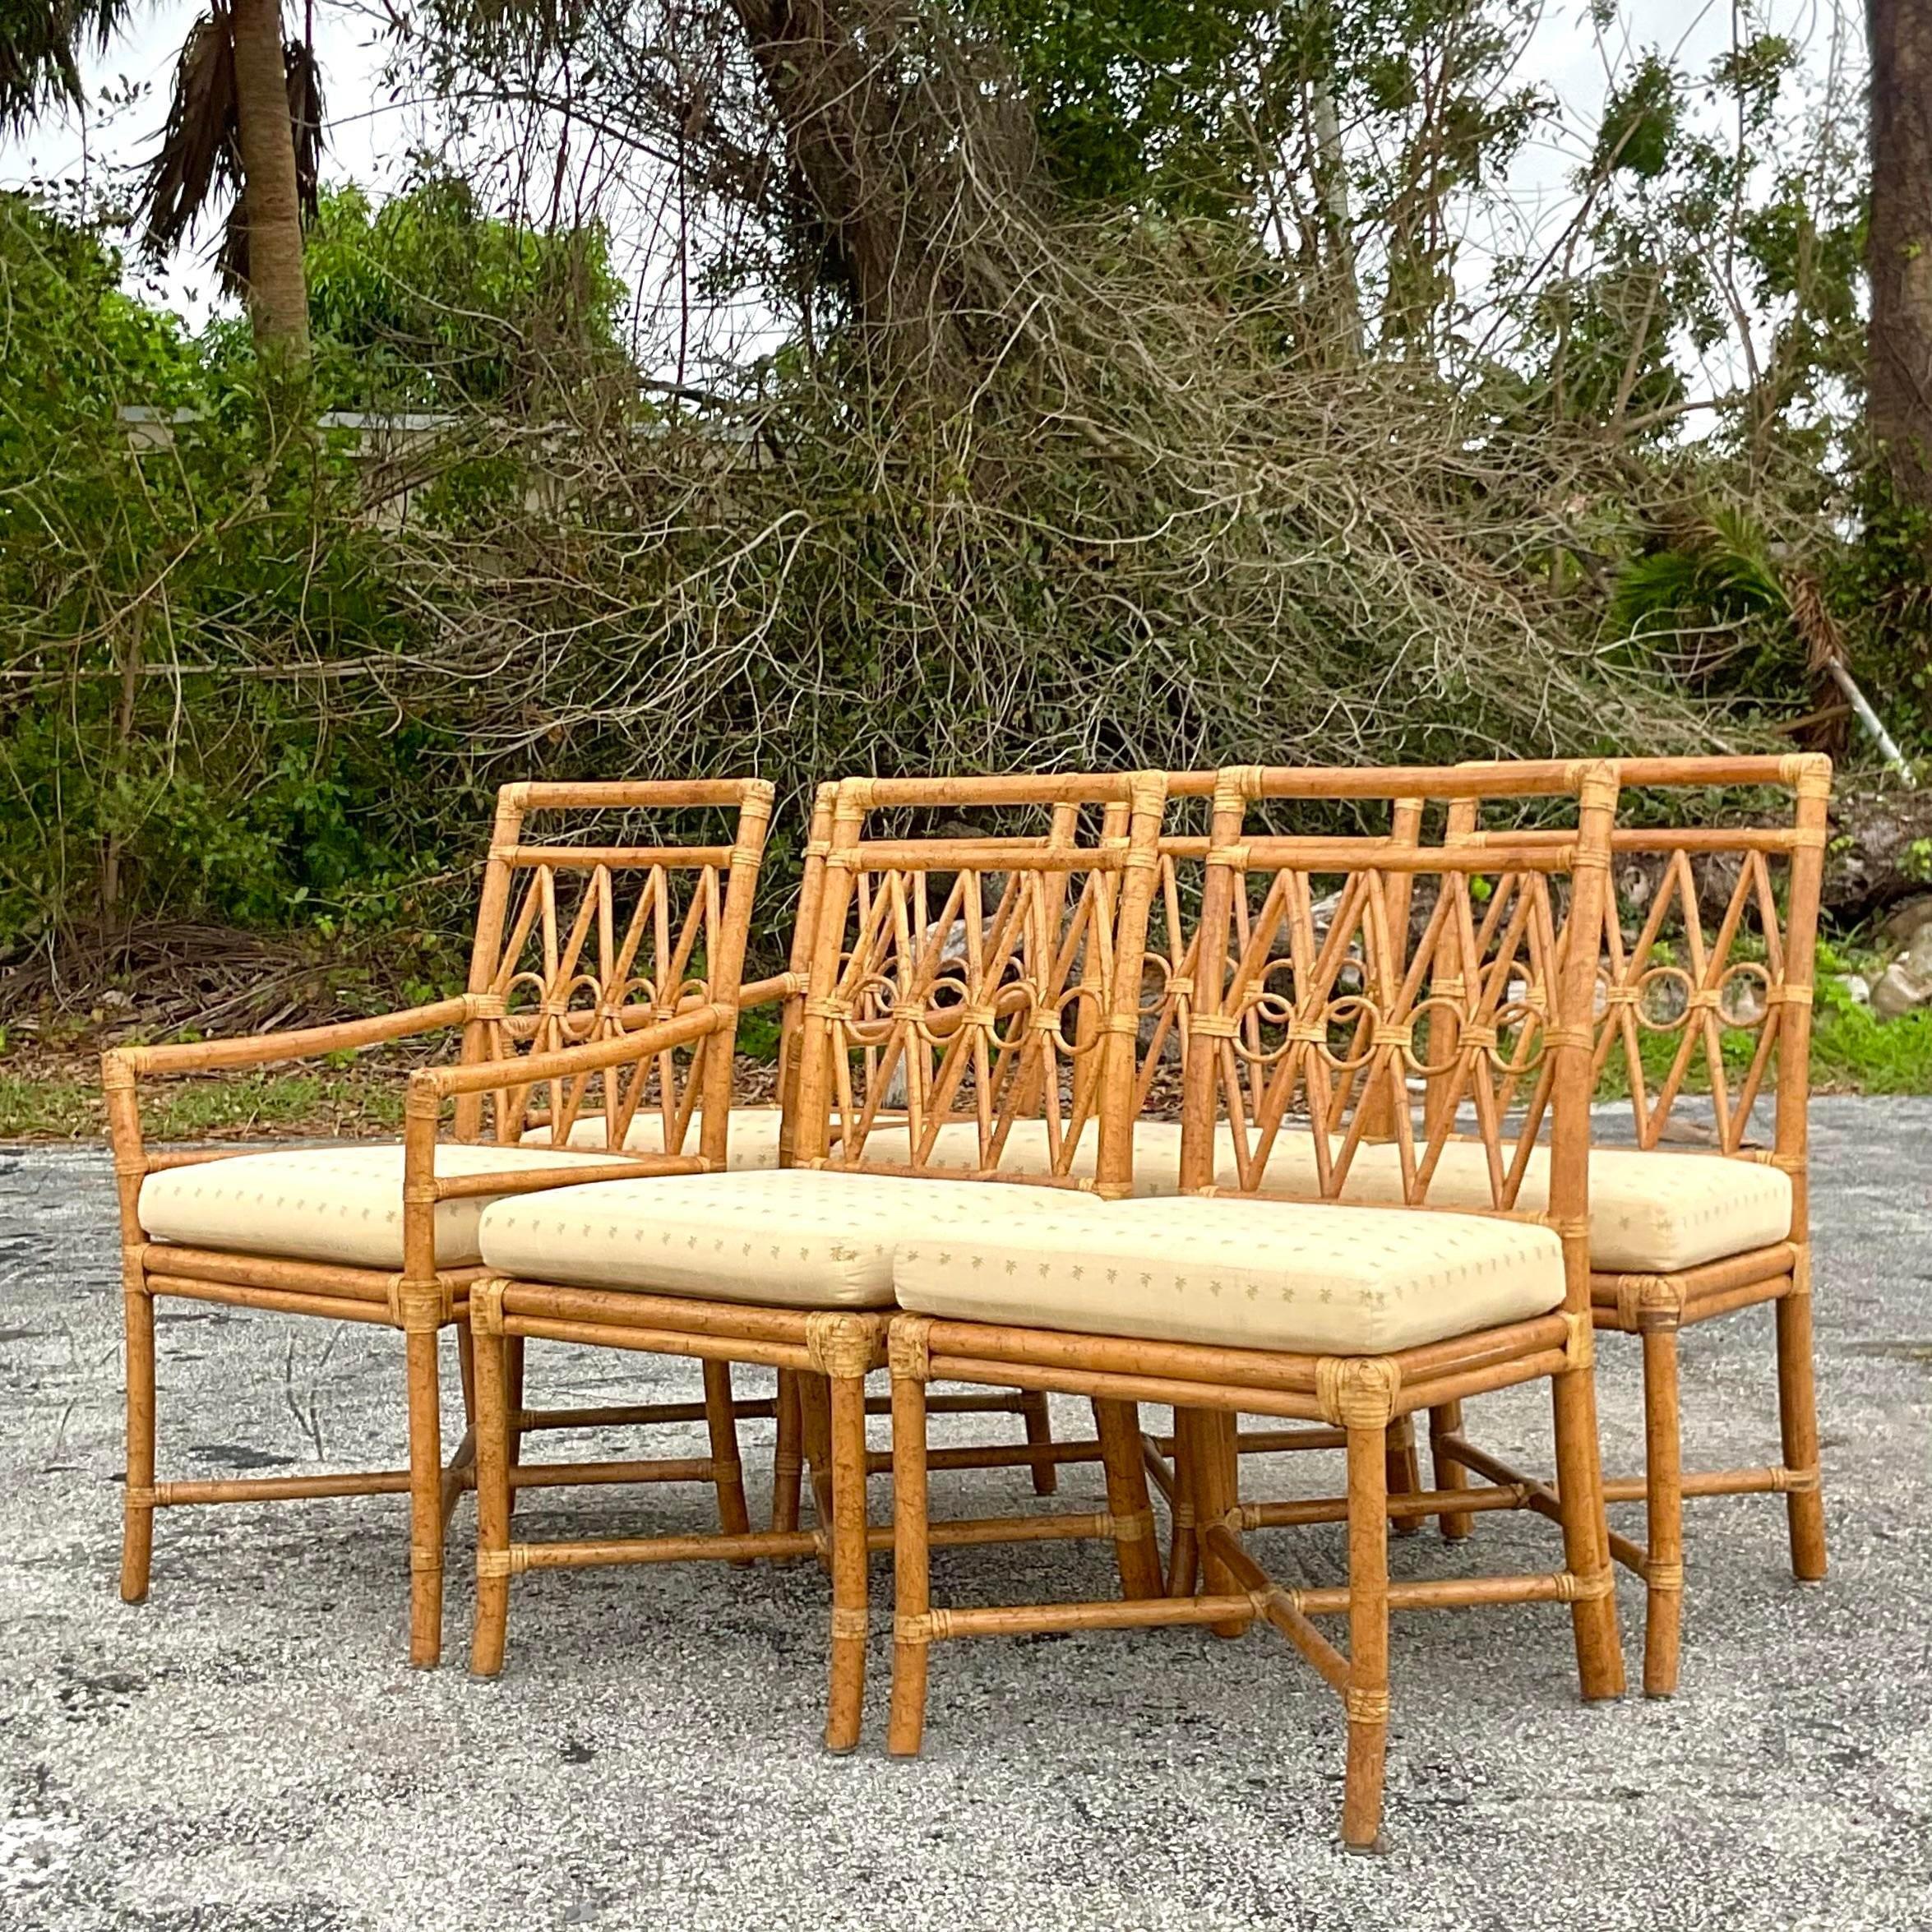 A stunning vintage Coastal dining set of 6. Made by the iconic Ficks Reed group and tagged below the chairs. Chic bent rattan in a ring motif. Acquired from a Palm Beach estate.

Side chairs 20.75x17.5x36.25
Table pedestal 32x28x29